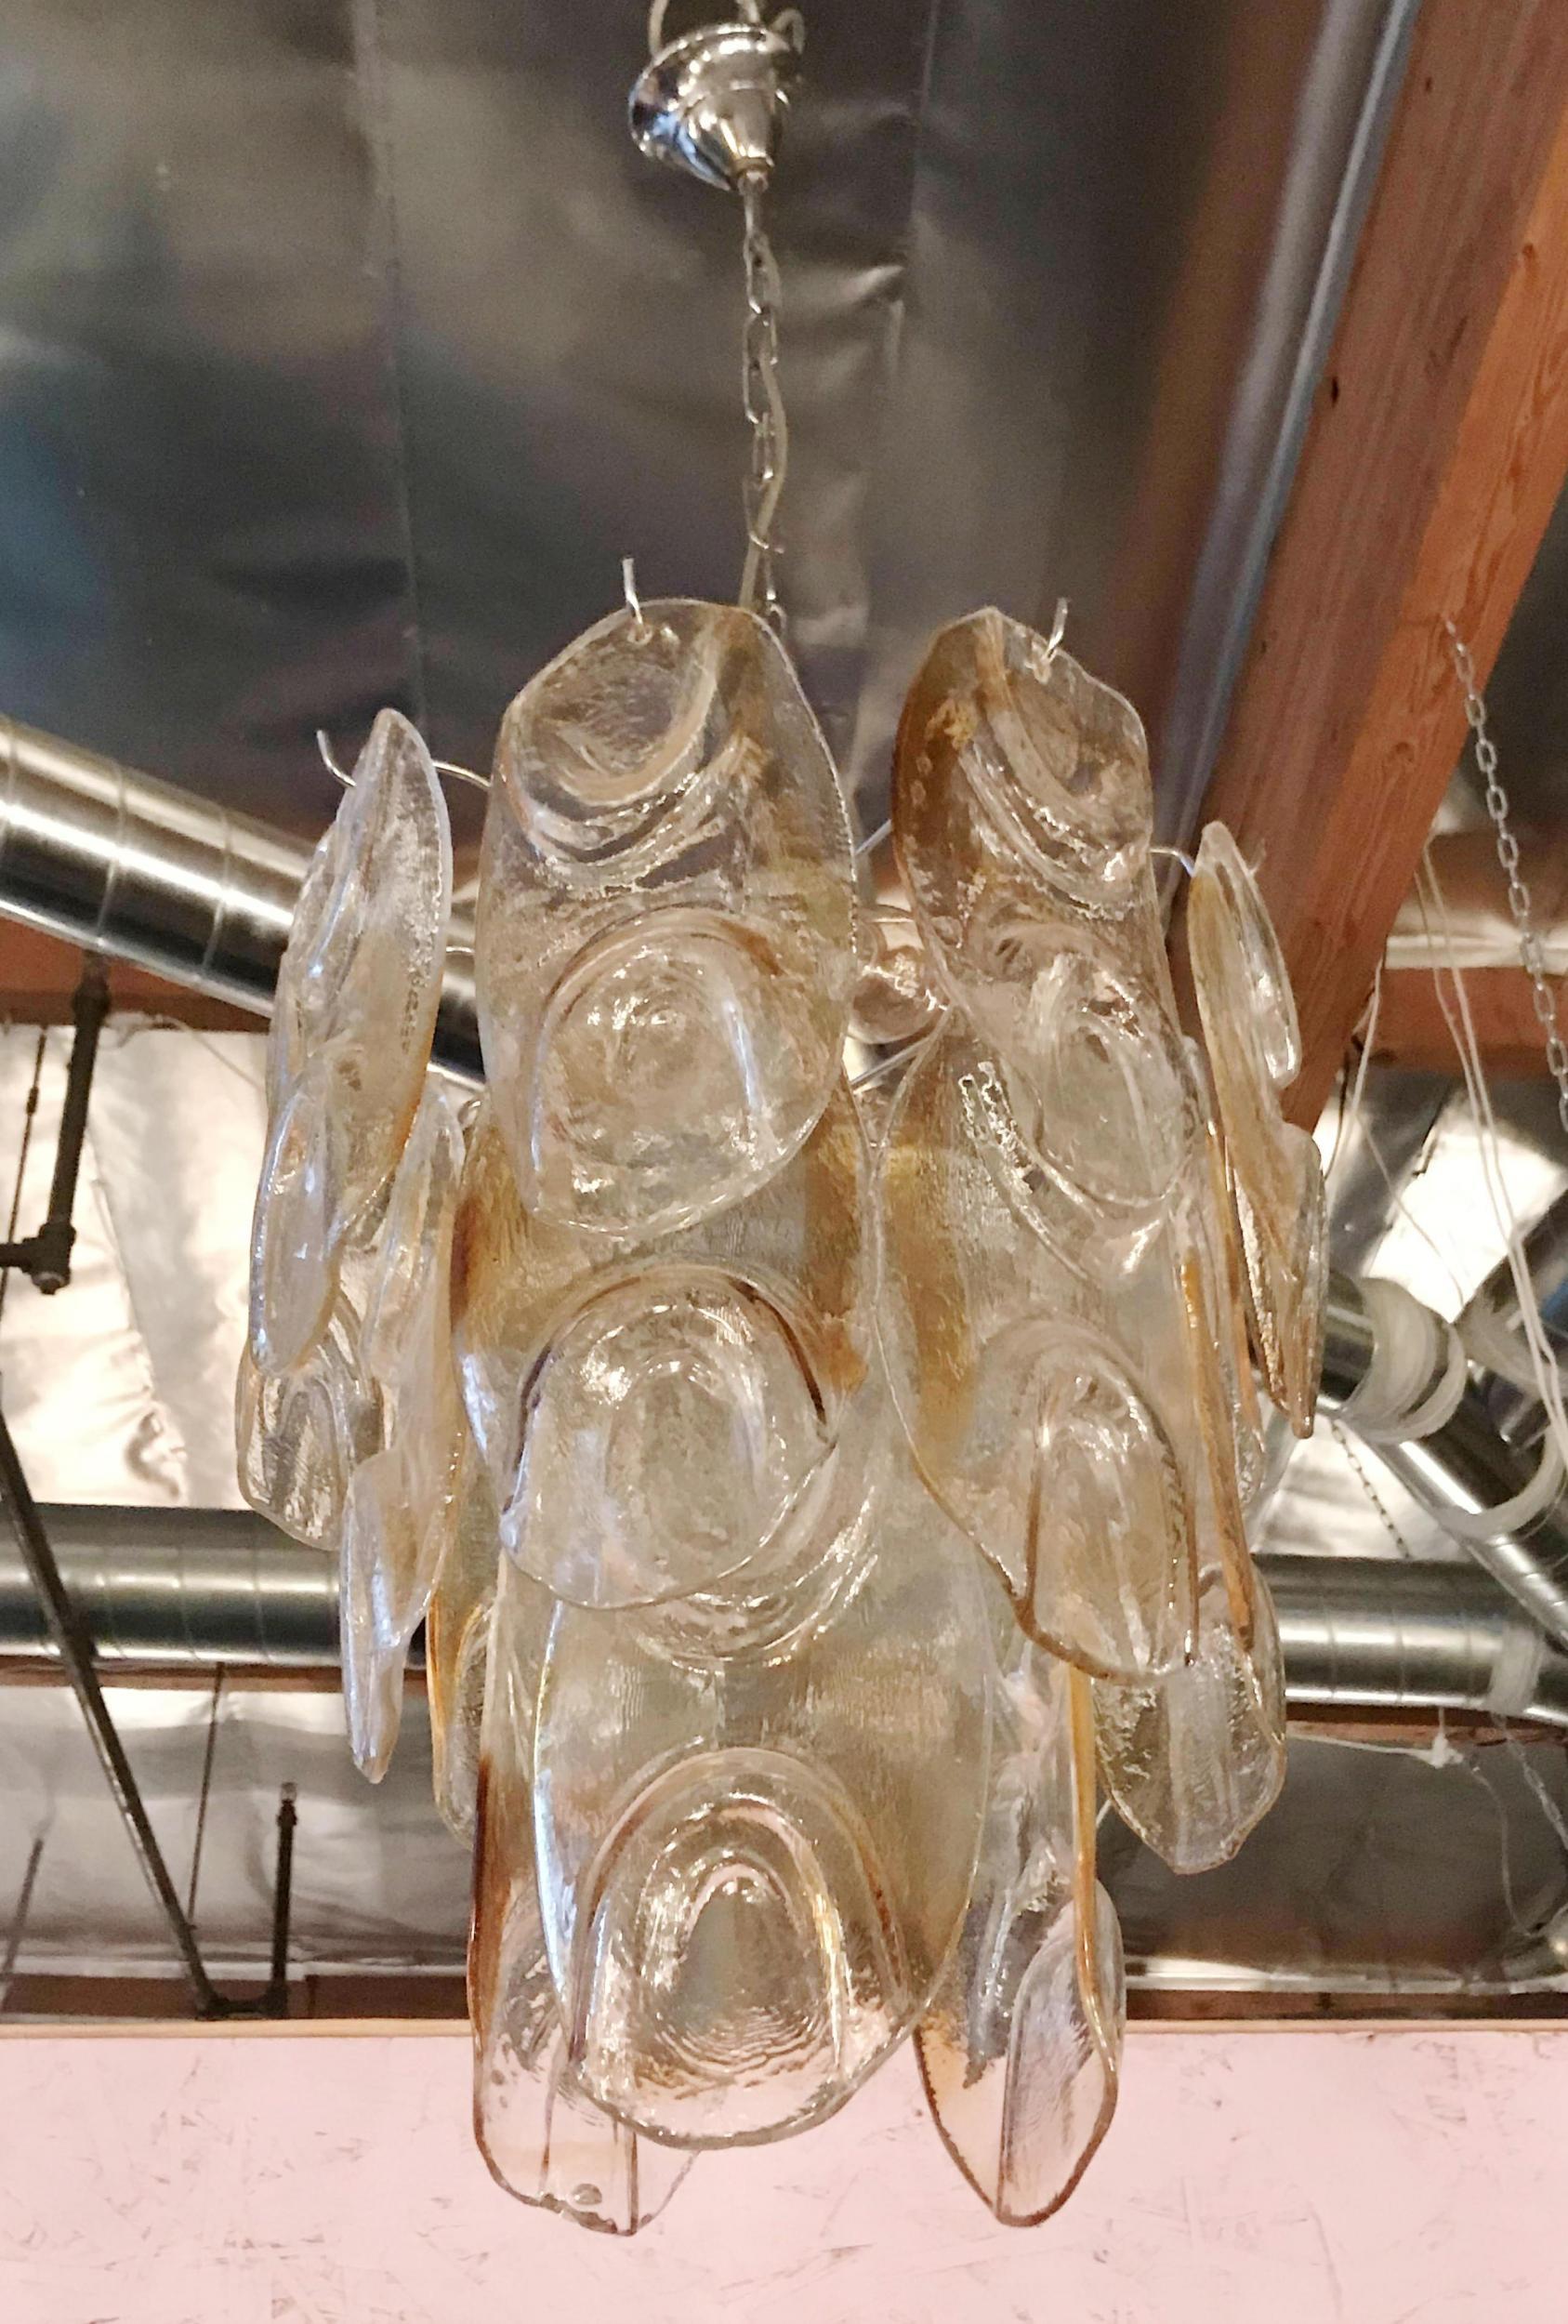 Vintage Italian chandelier w/ clear & amber murano glass leaf petals hanging on nickel frame. Designed by Mazzega, circa 1960s.